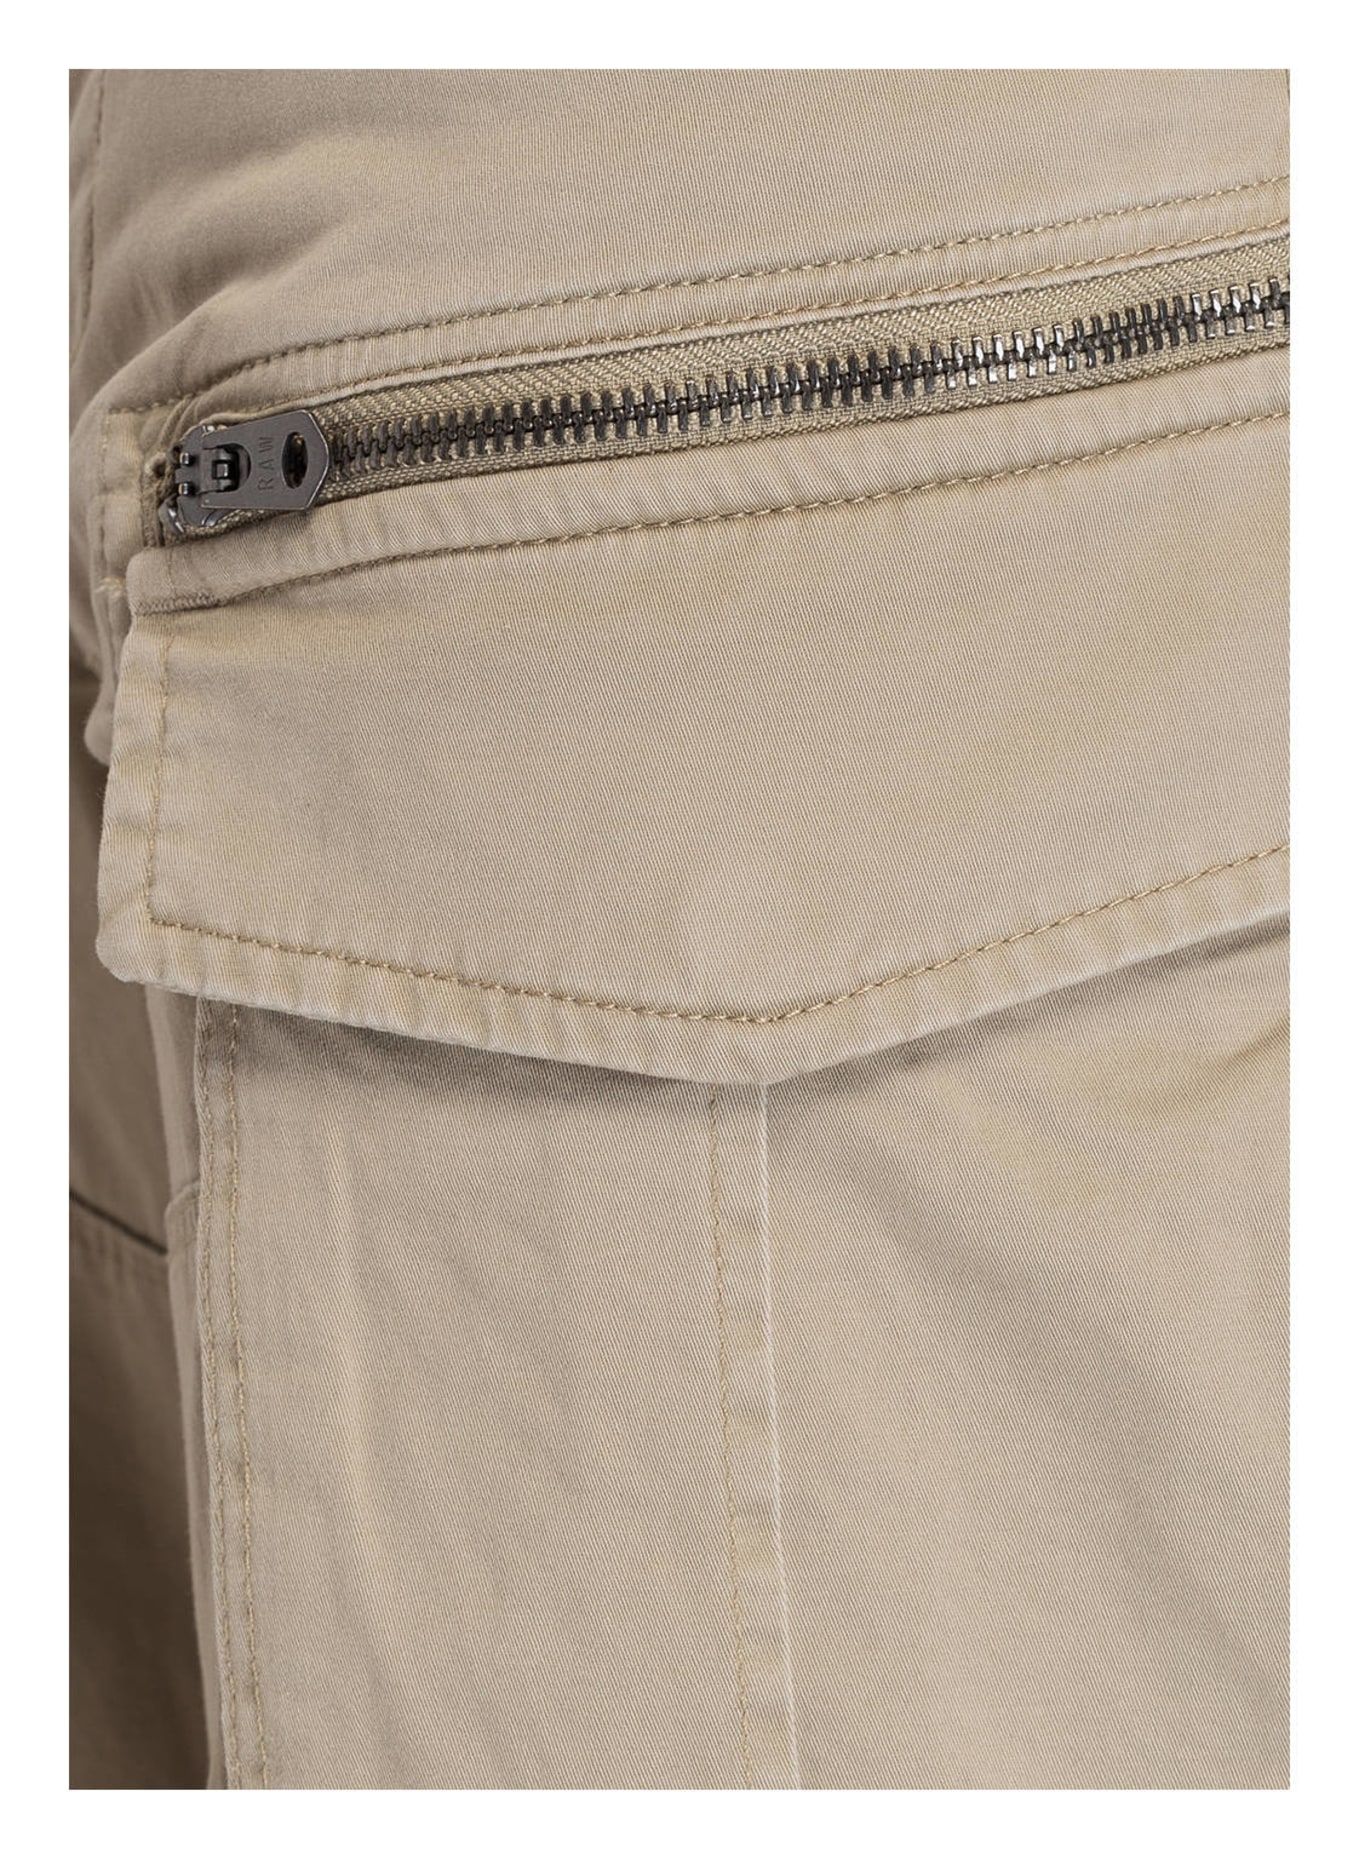 G-Star RAW Cargo pants tapered fit, Color: BEIGE (Image 5)